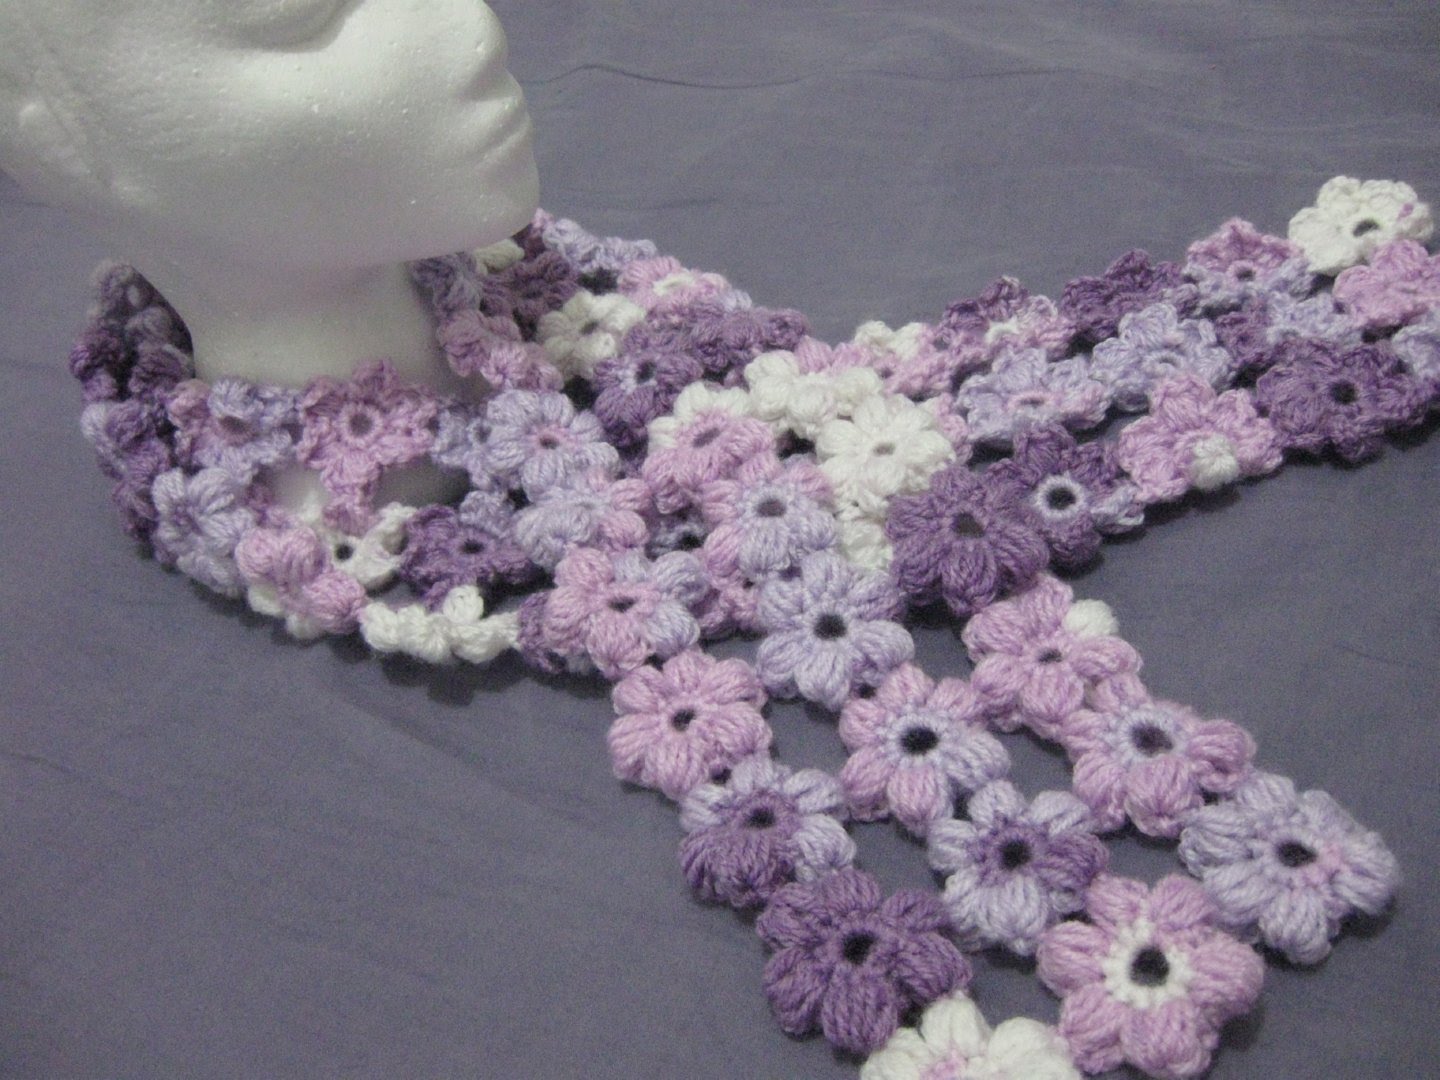 Gorgeous Scrap Yarn Puff Stitch Flower Scarf Pattern To Amp Up Your Glam [Free Pattern]